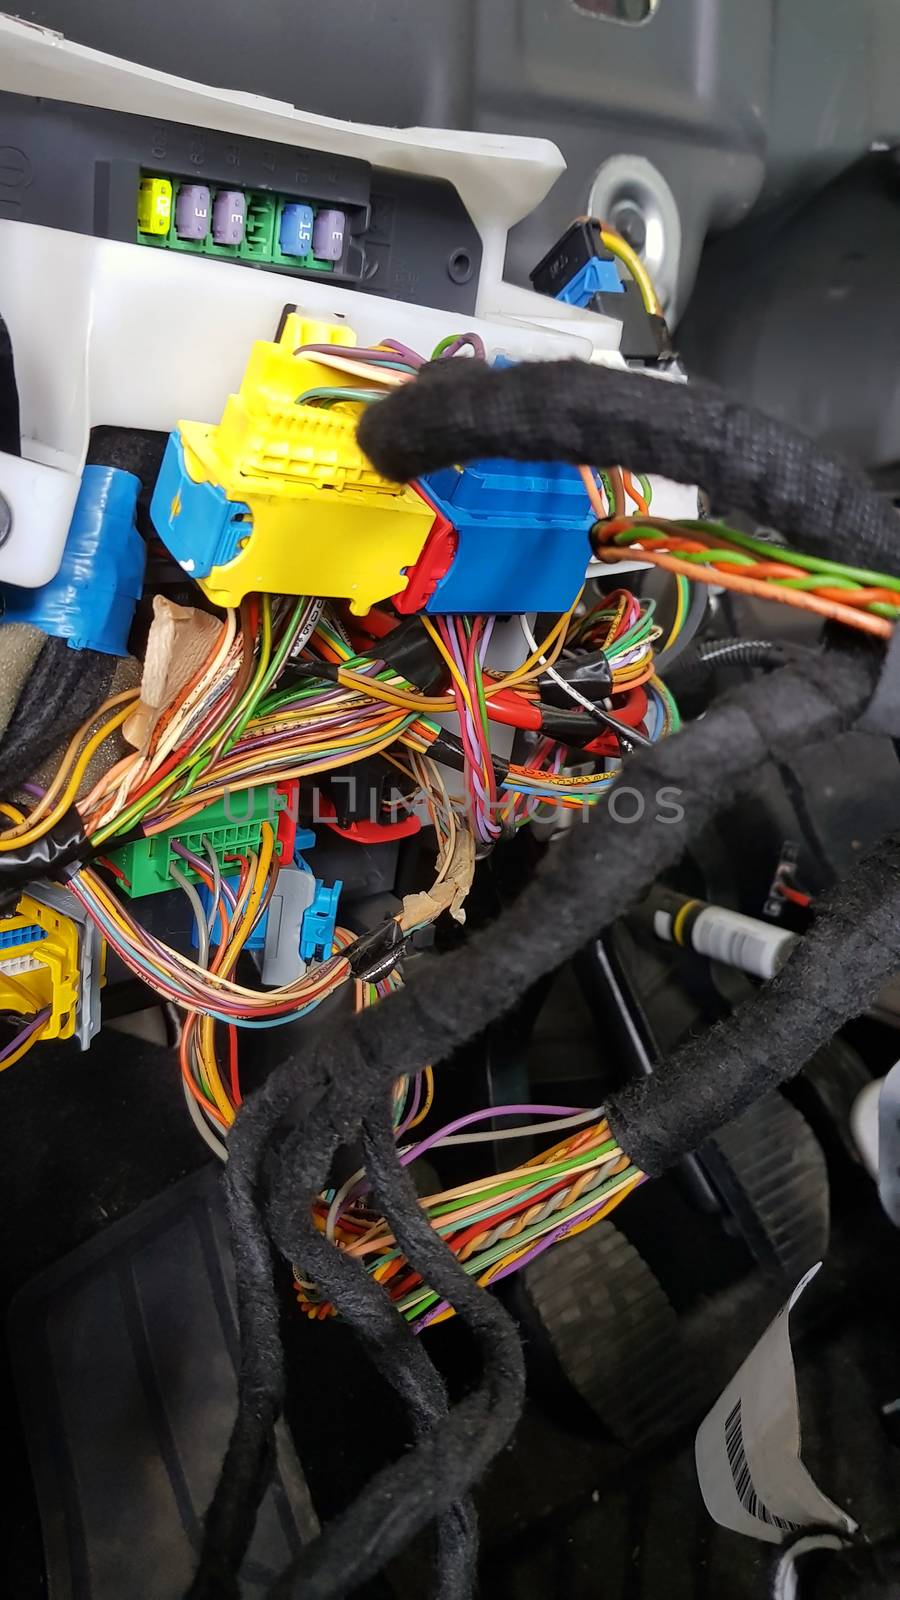 Car electrical system, electric computer unit by savcoco